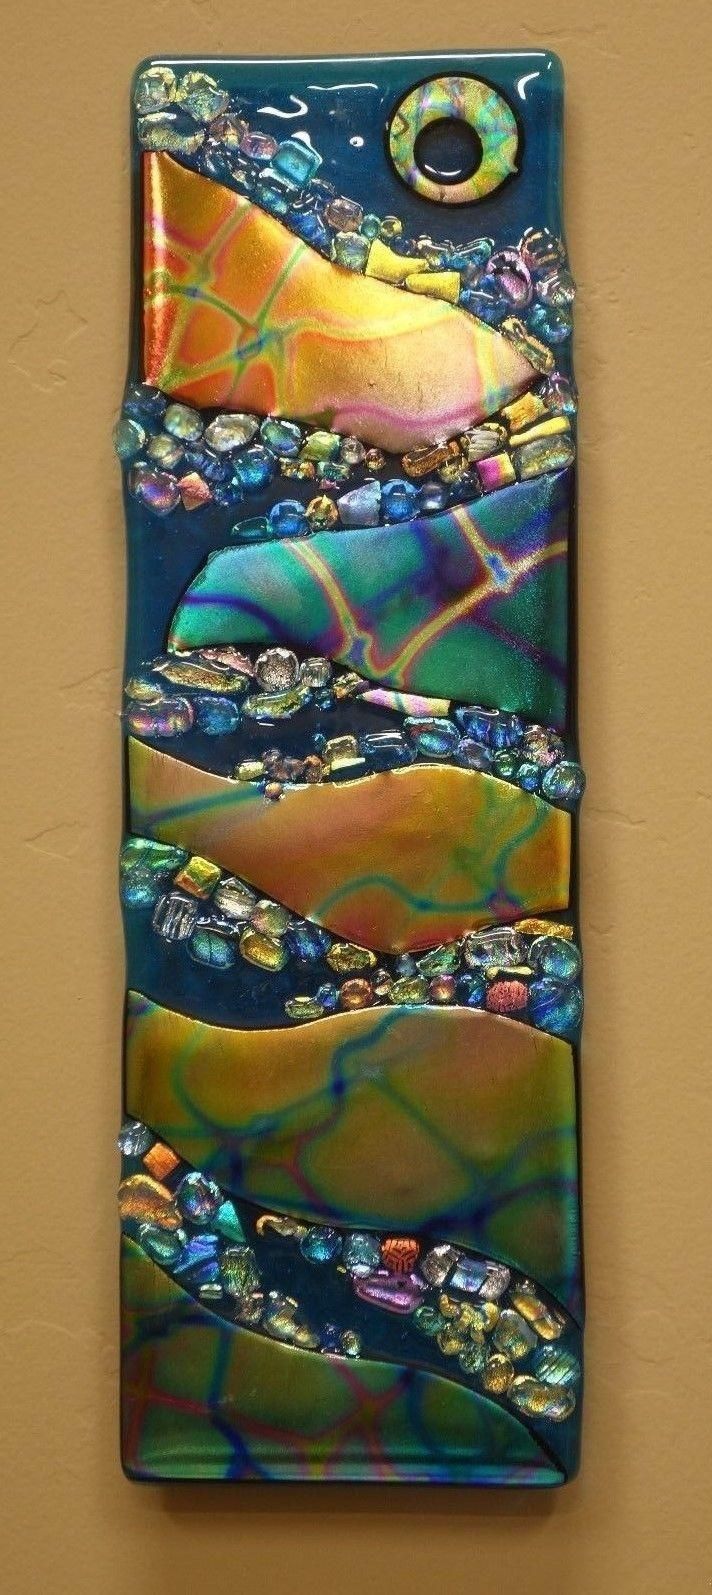 1599 Best Fusing Images On Pinterest | Fused Glass, Glass Art And Pertaining To Fused Glass Fish Wall Art (Photo 7 of 20)